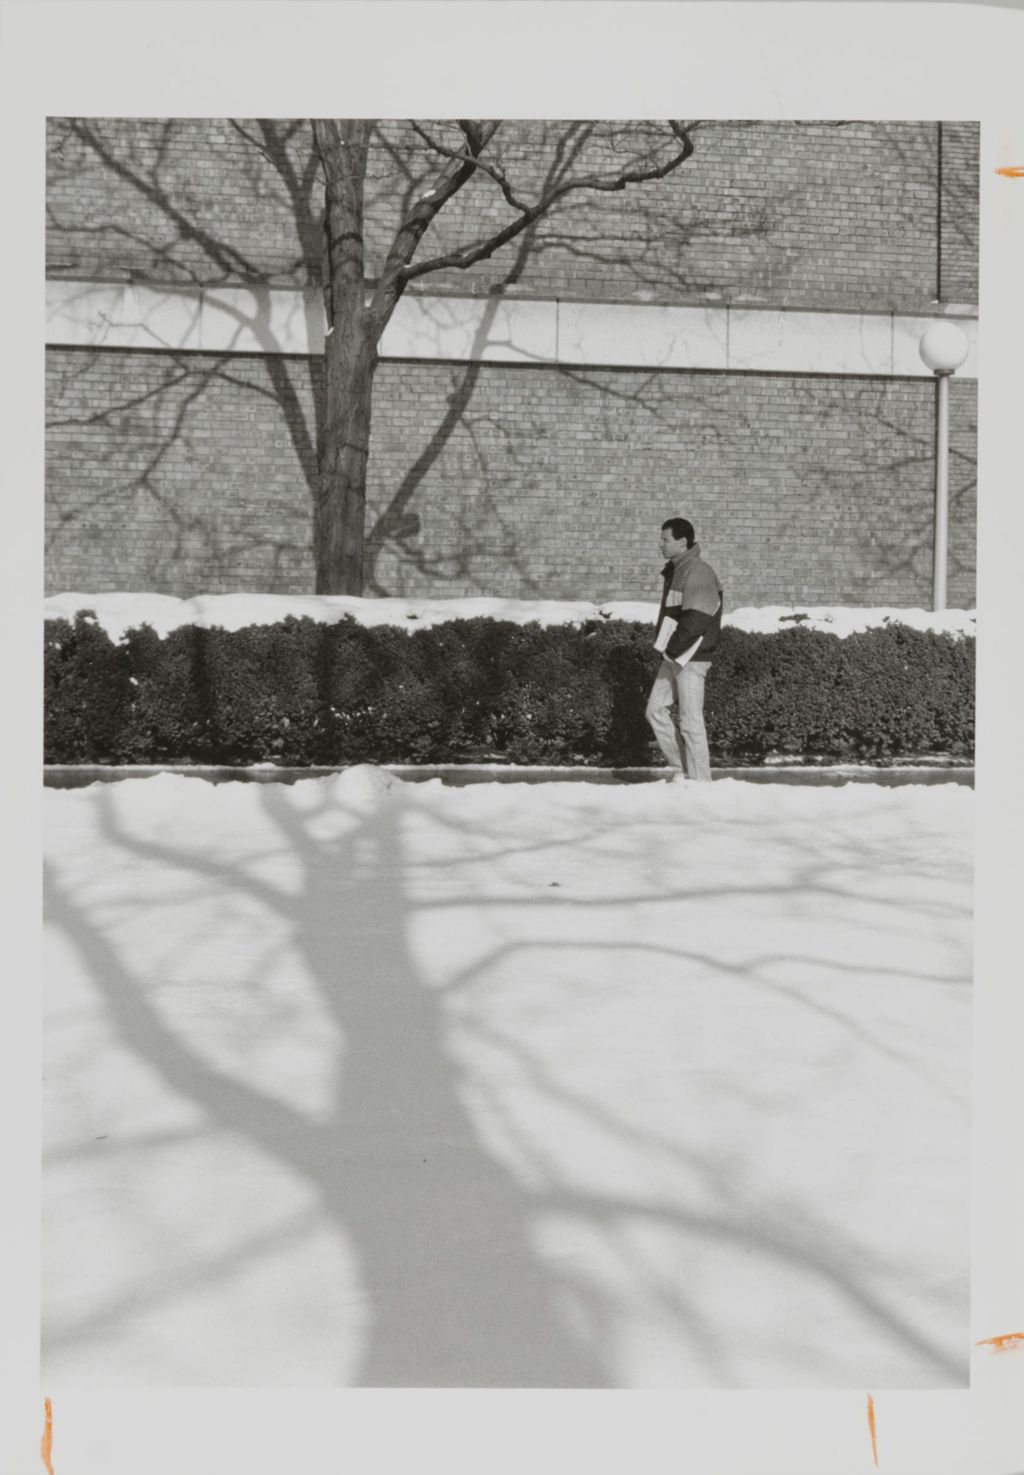 Miniature of Student walking on campus in winter